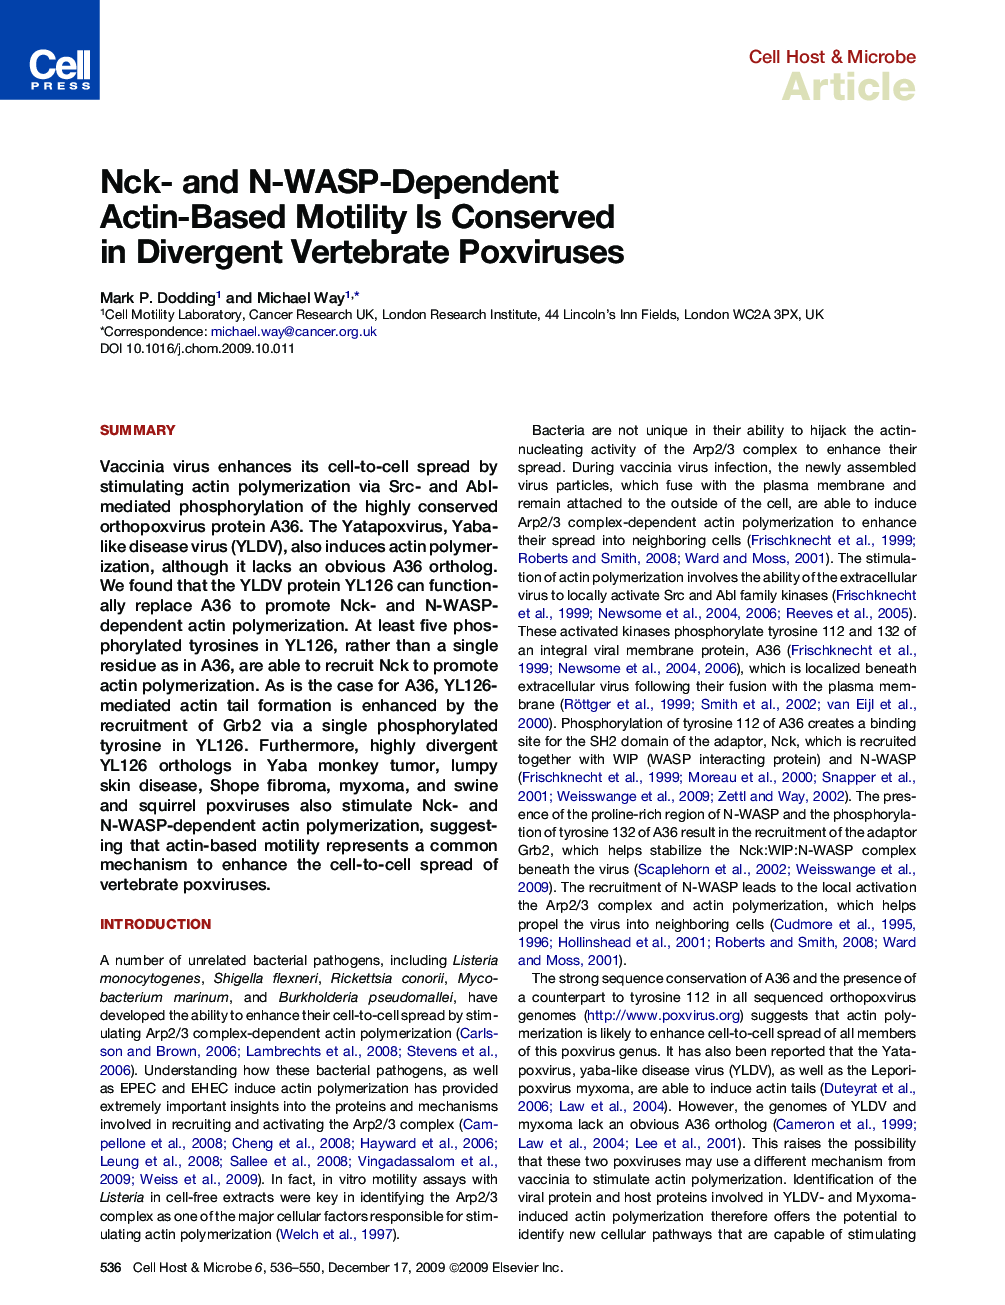 Nck- and N-WASP-Dependent Actin-Based Motility Is Conserved in Divergent Vertebrate Poxviruses